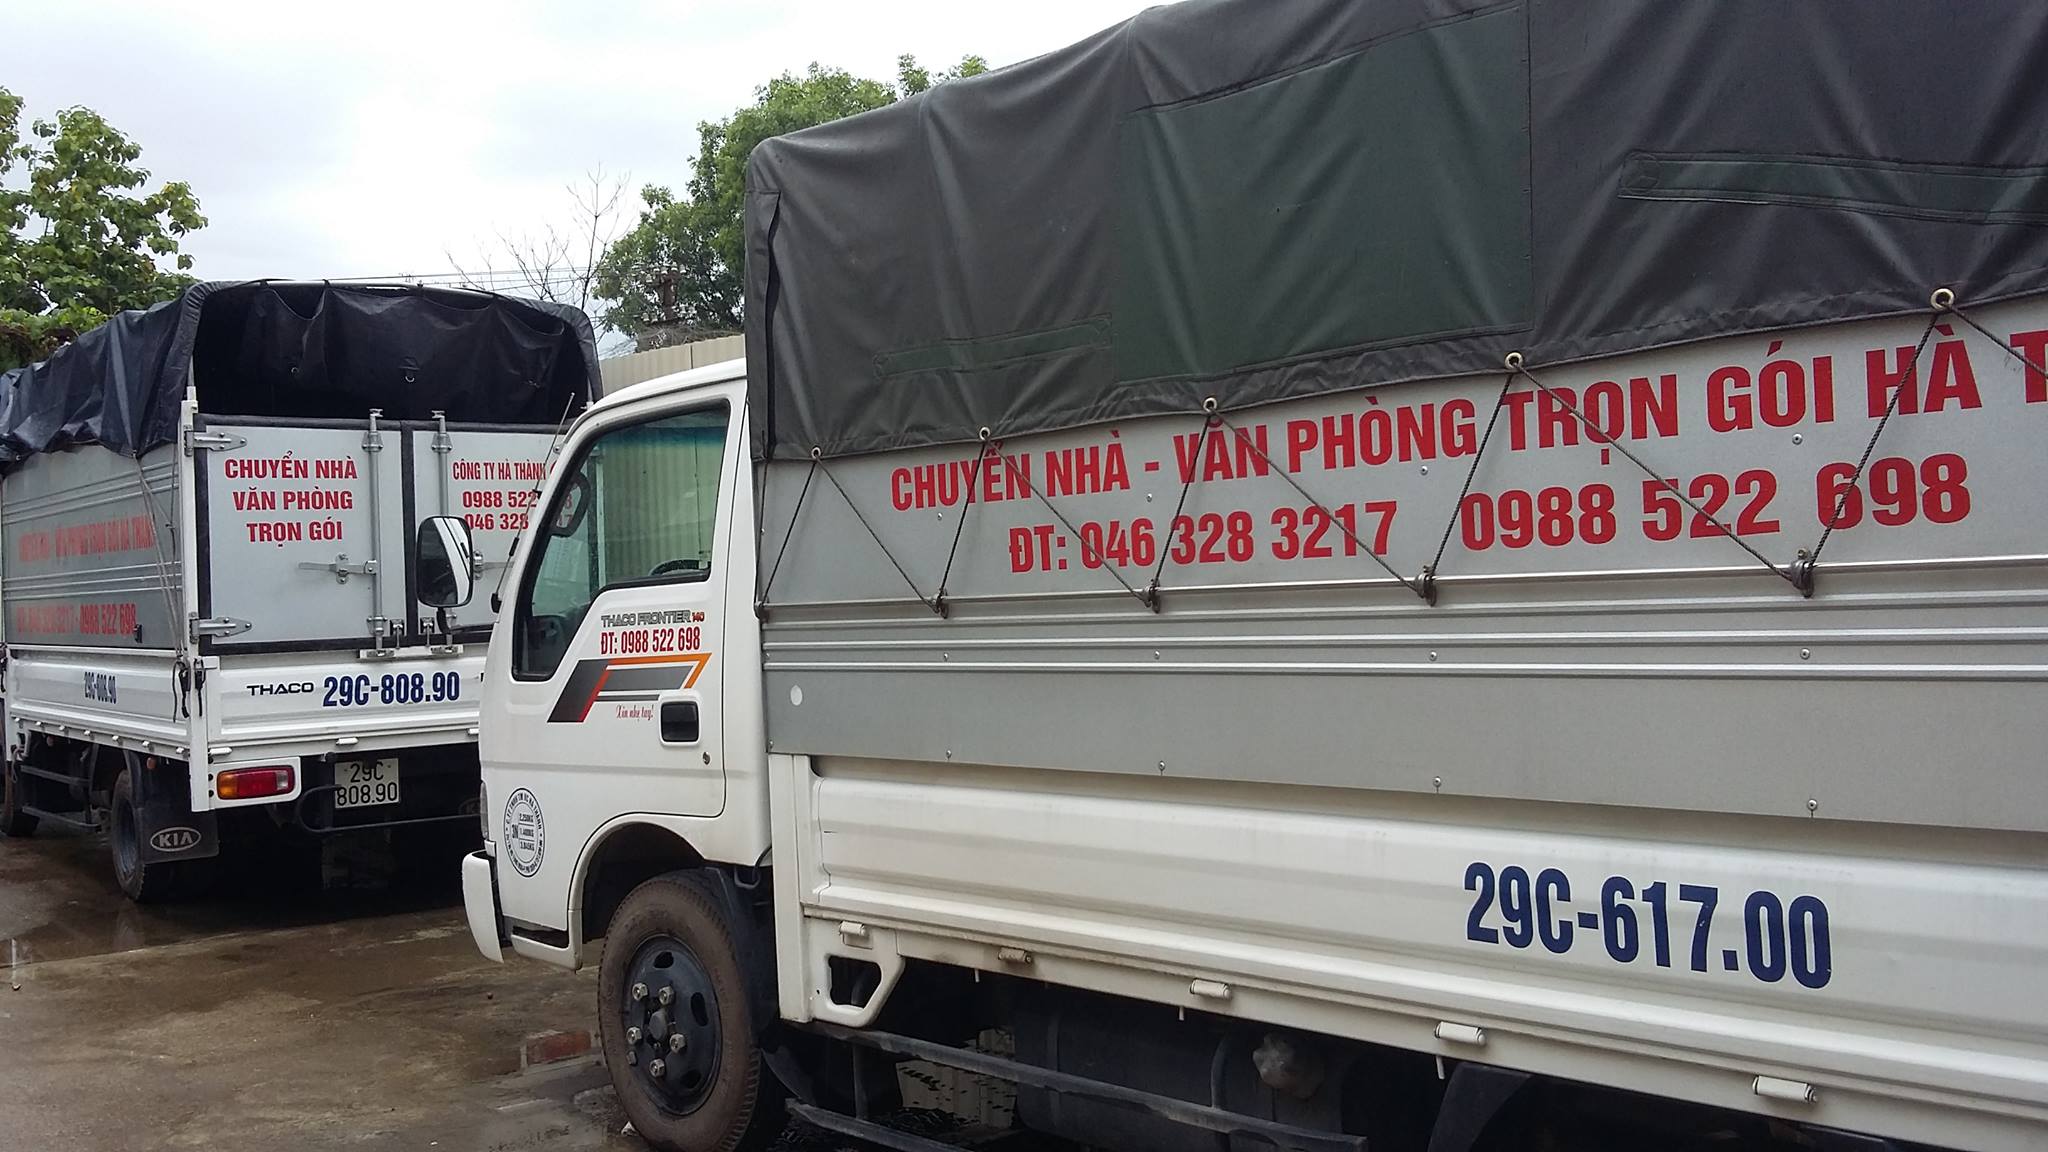  Ha Thanh house mover service - Transport Trading Co., Ltd